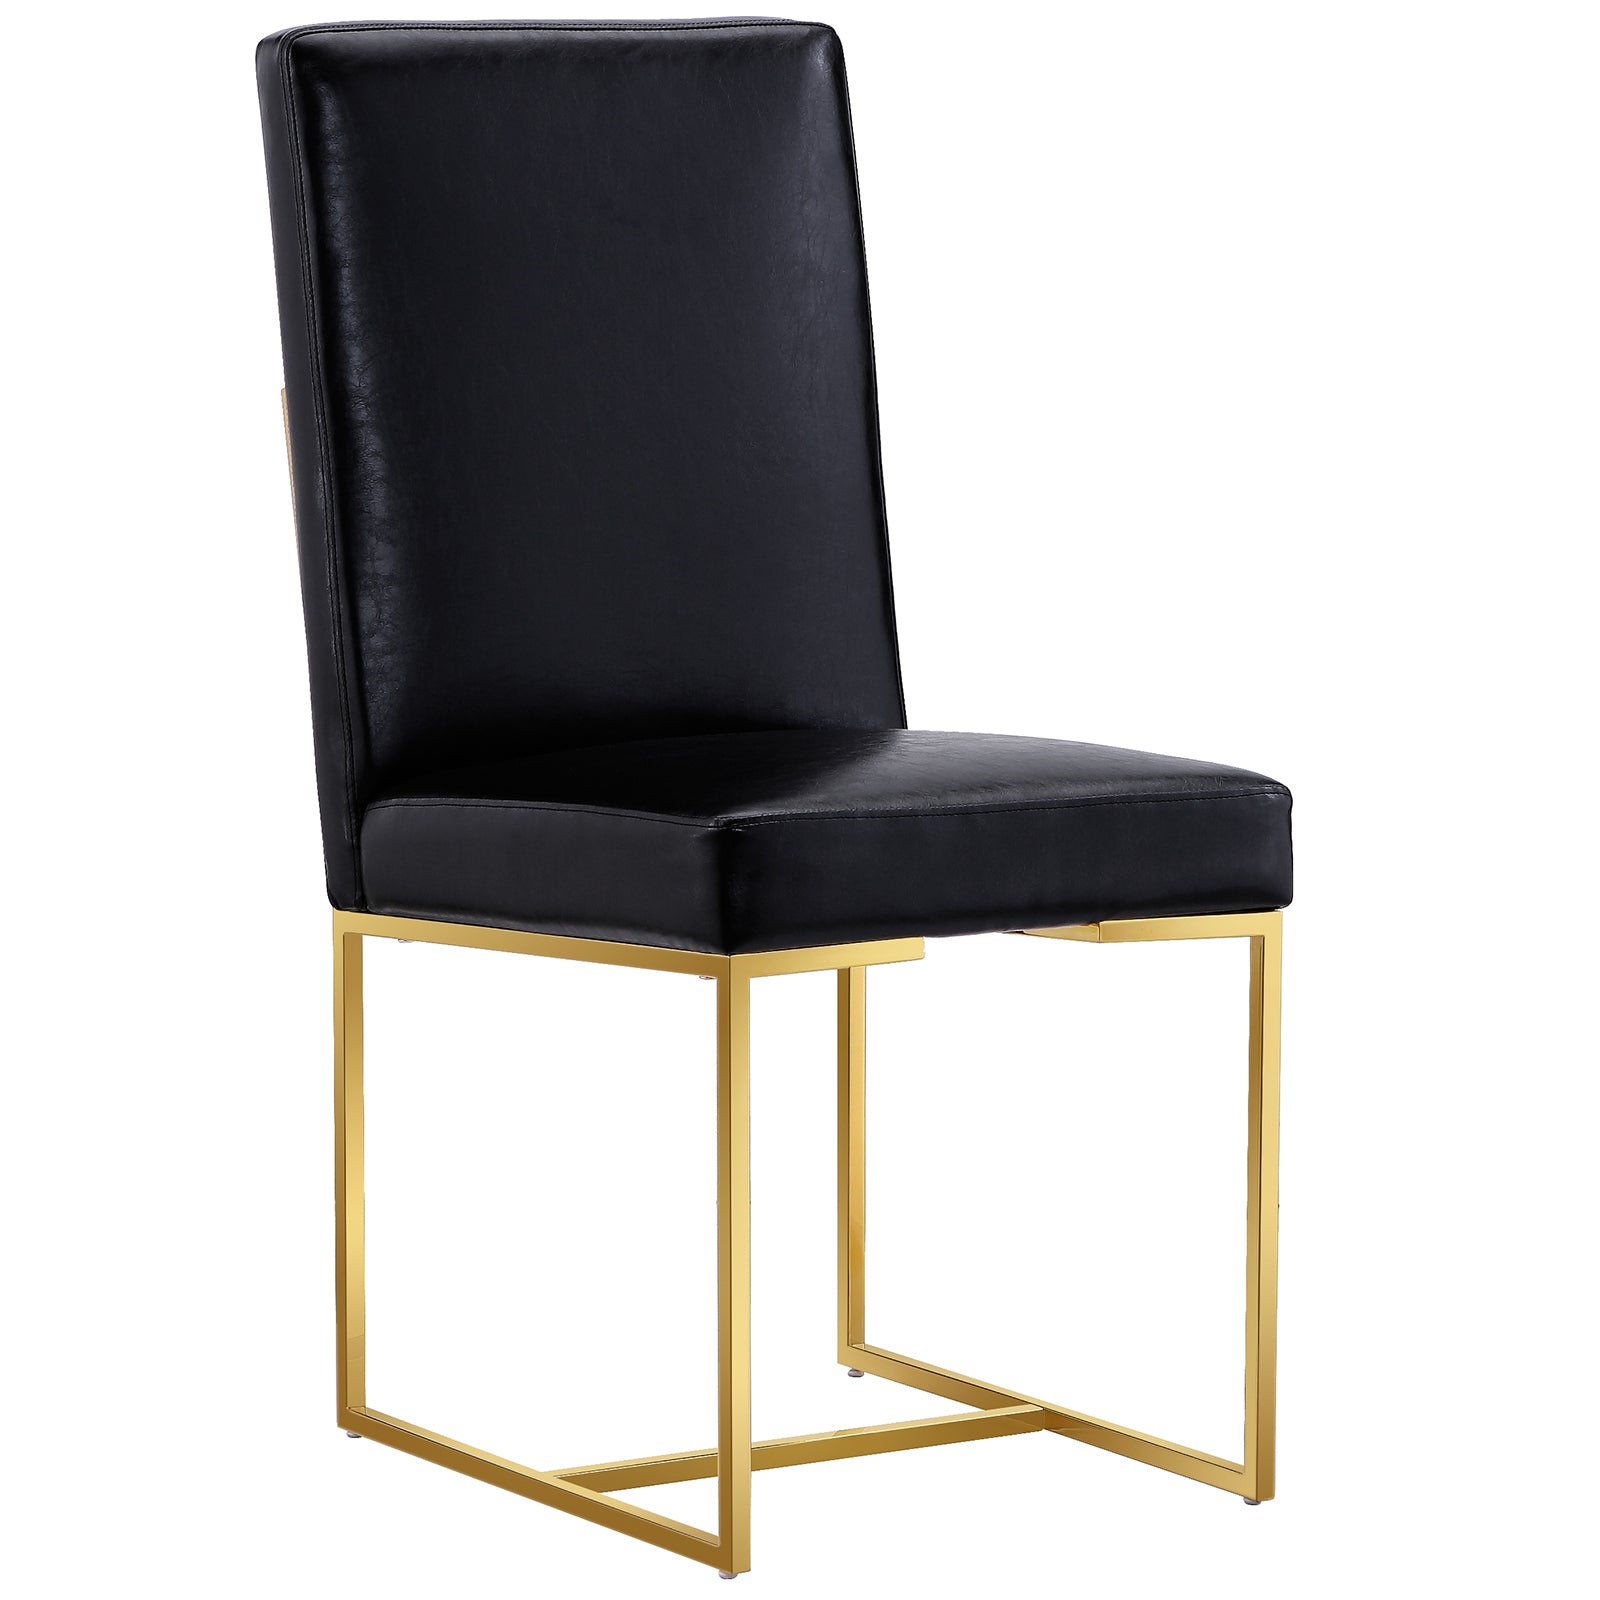 Black leather Dining Chairs | Square backrest| Metal sled base | C147